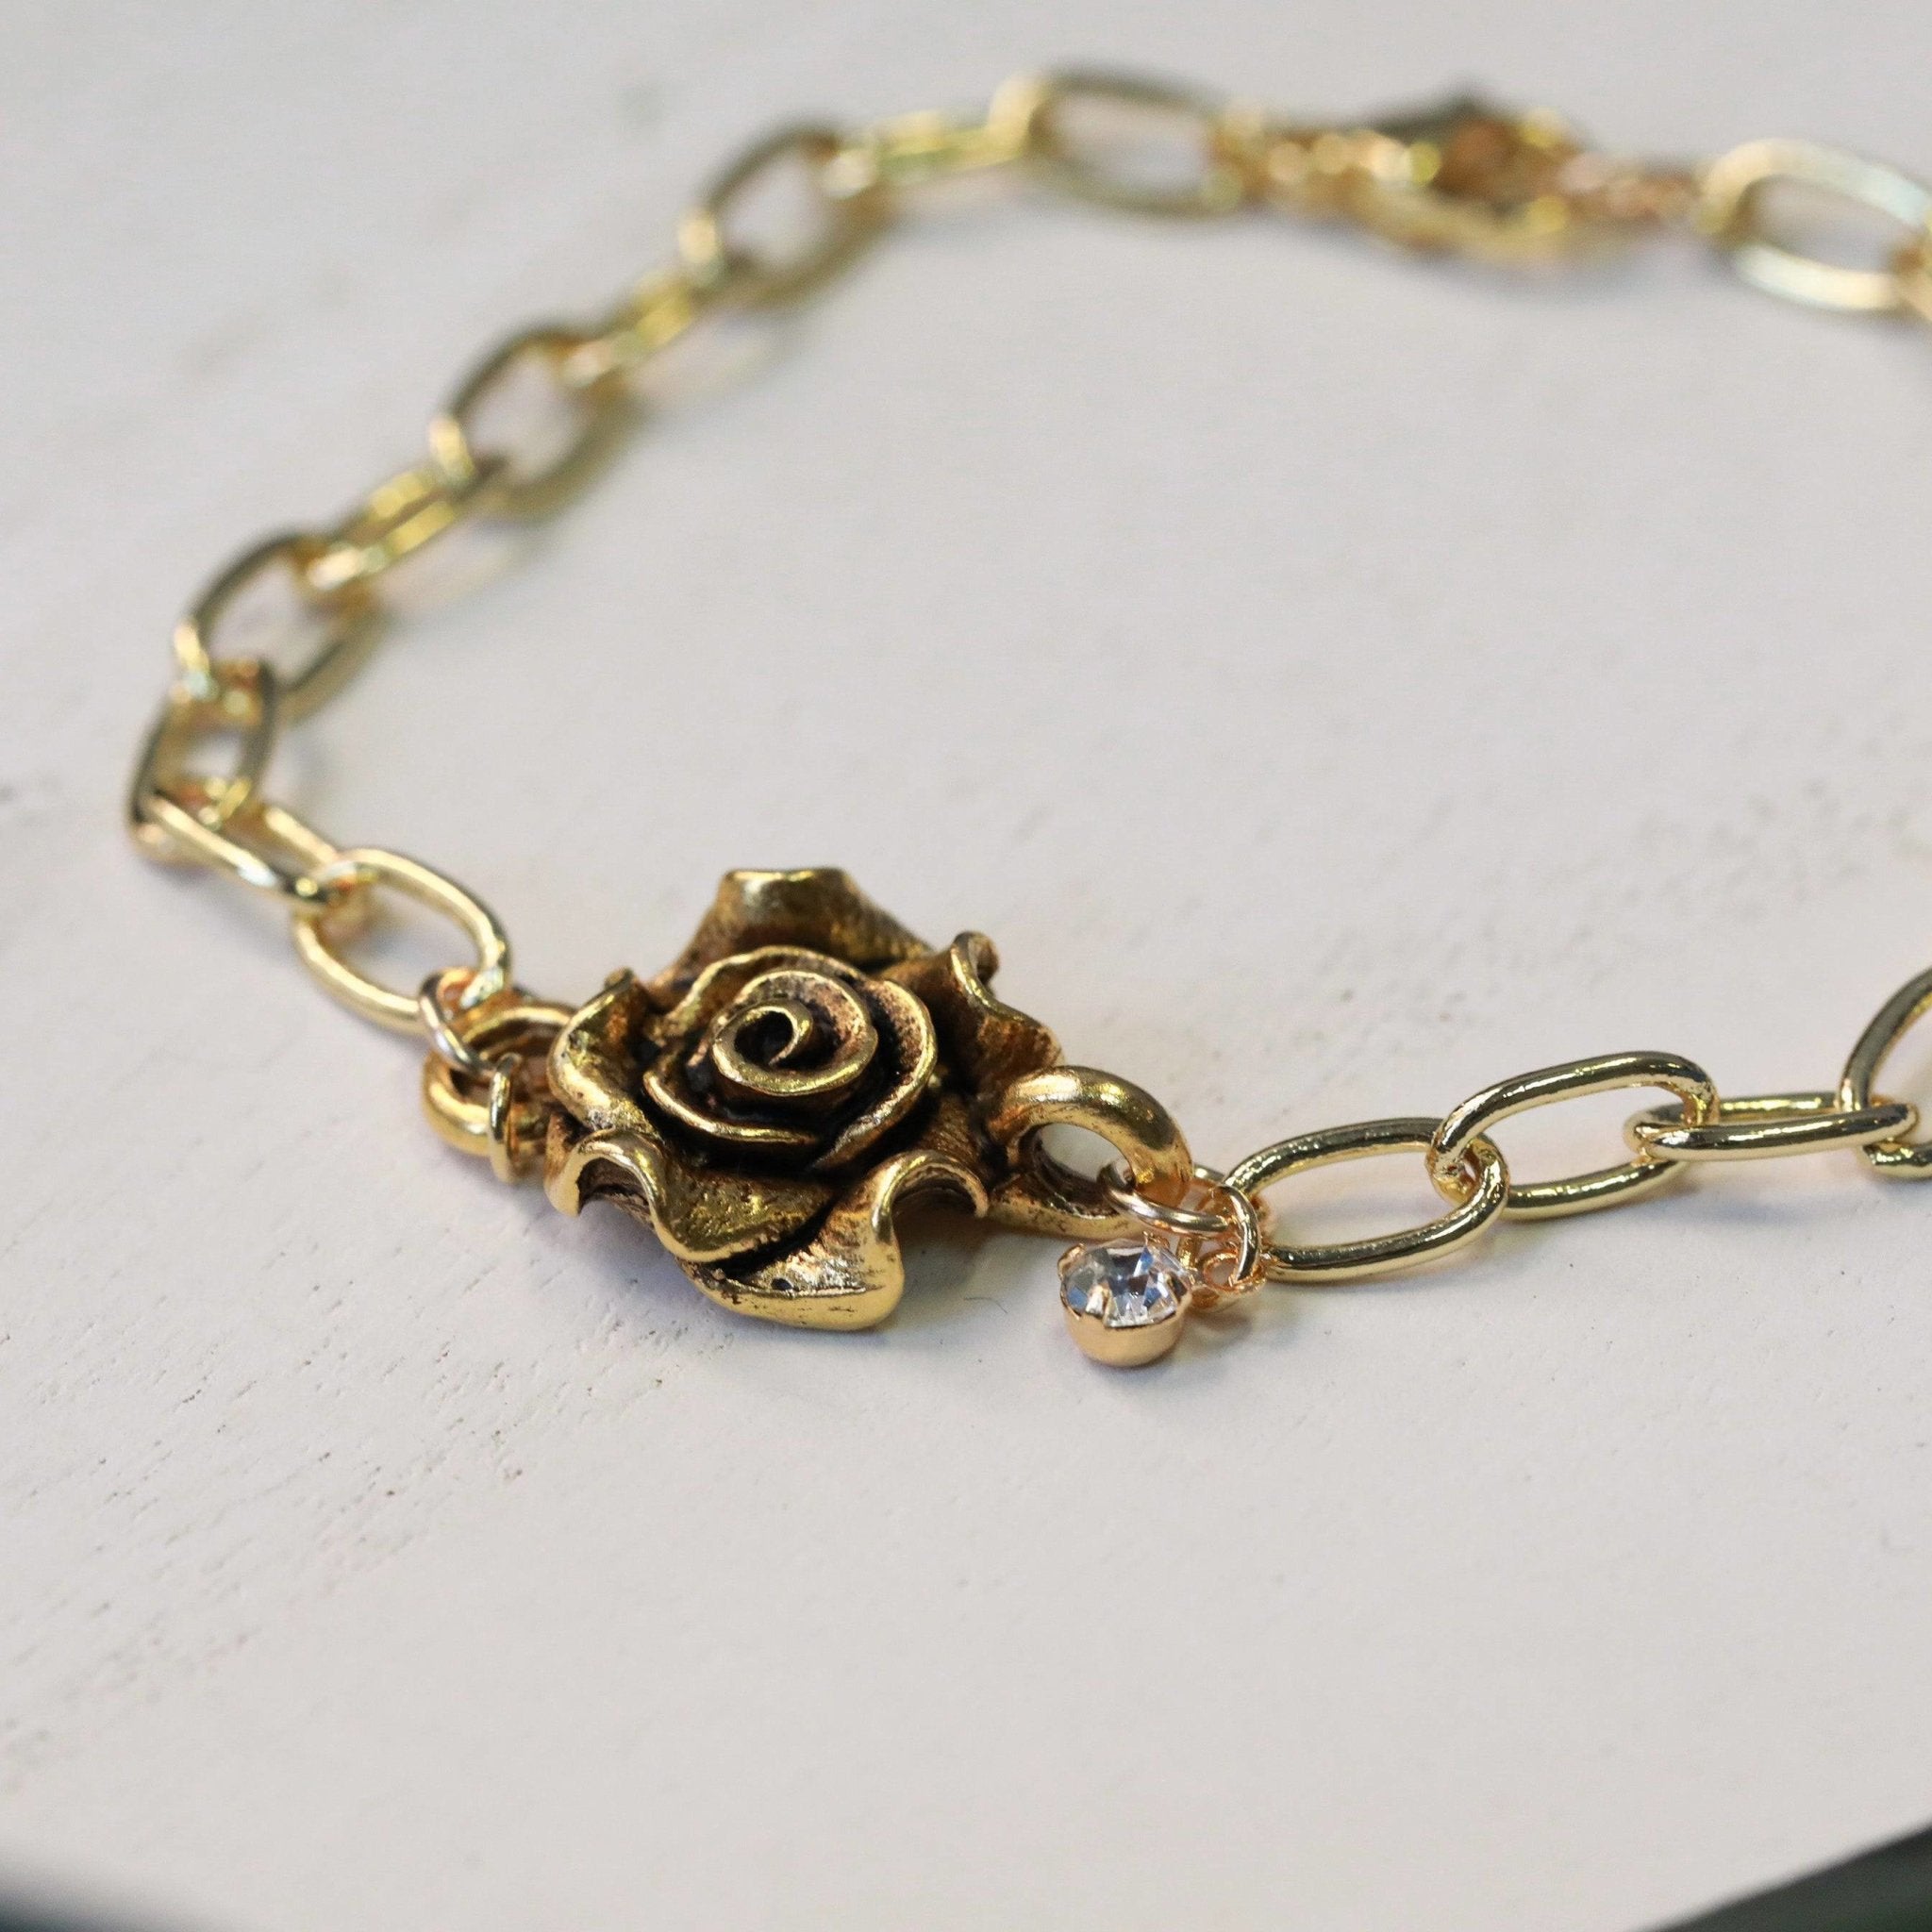 gold rose connector bracelet with crystal charm on gold plated chain